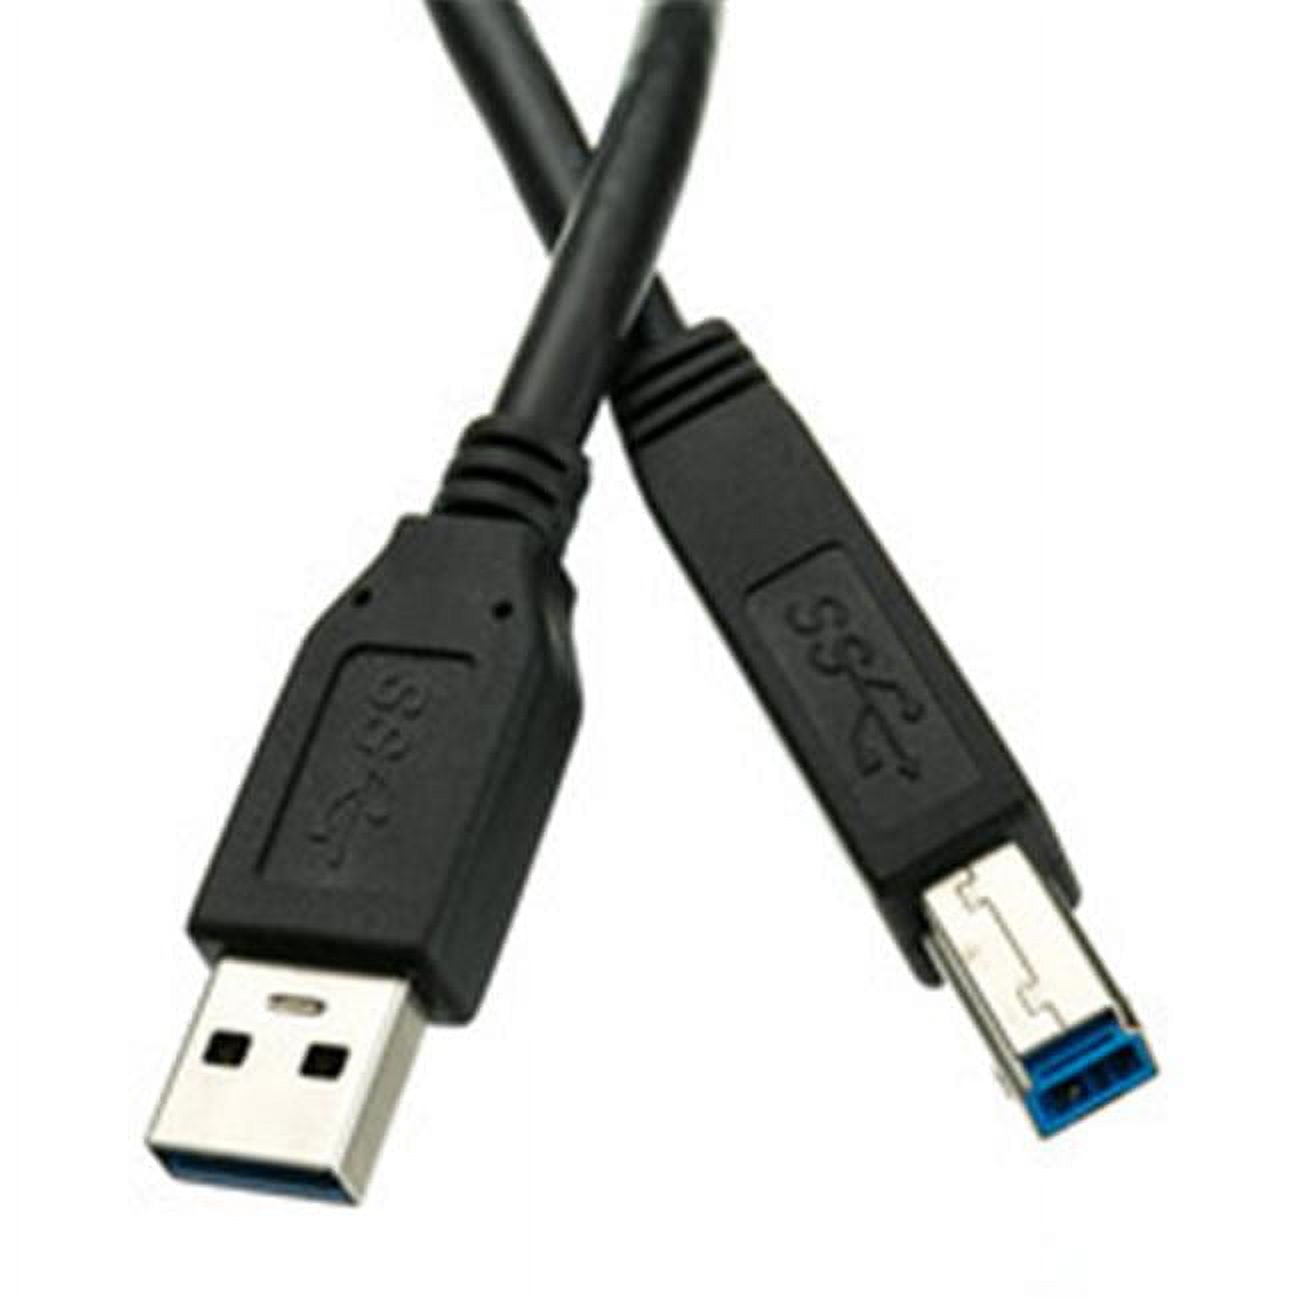 Black USB 3.0 Printer & Device Cable, Type A Male to Type B Male - 10 ft -  Aish, AI206941